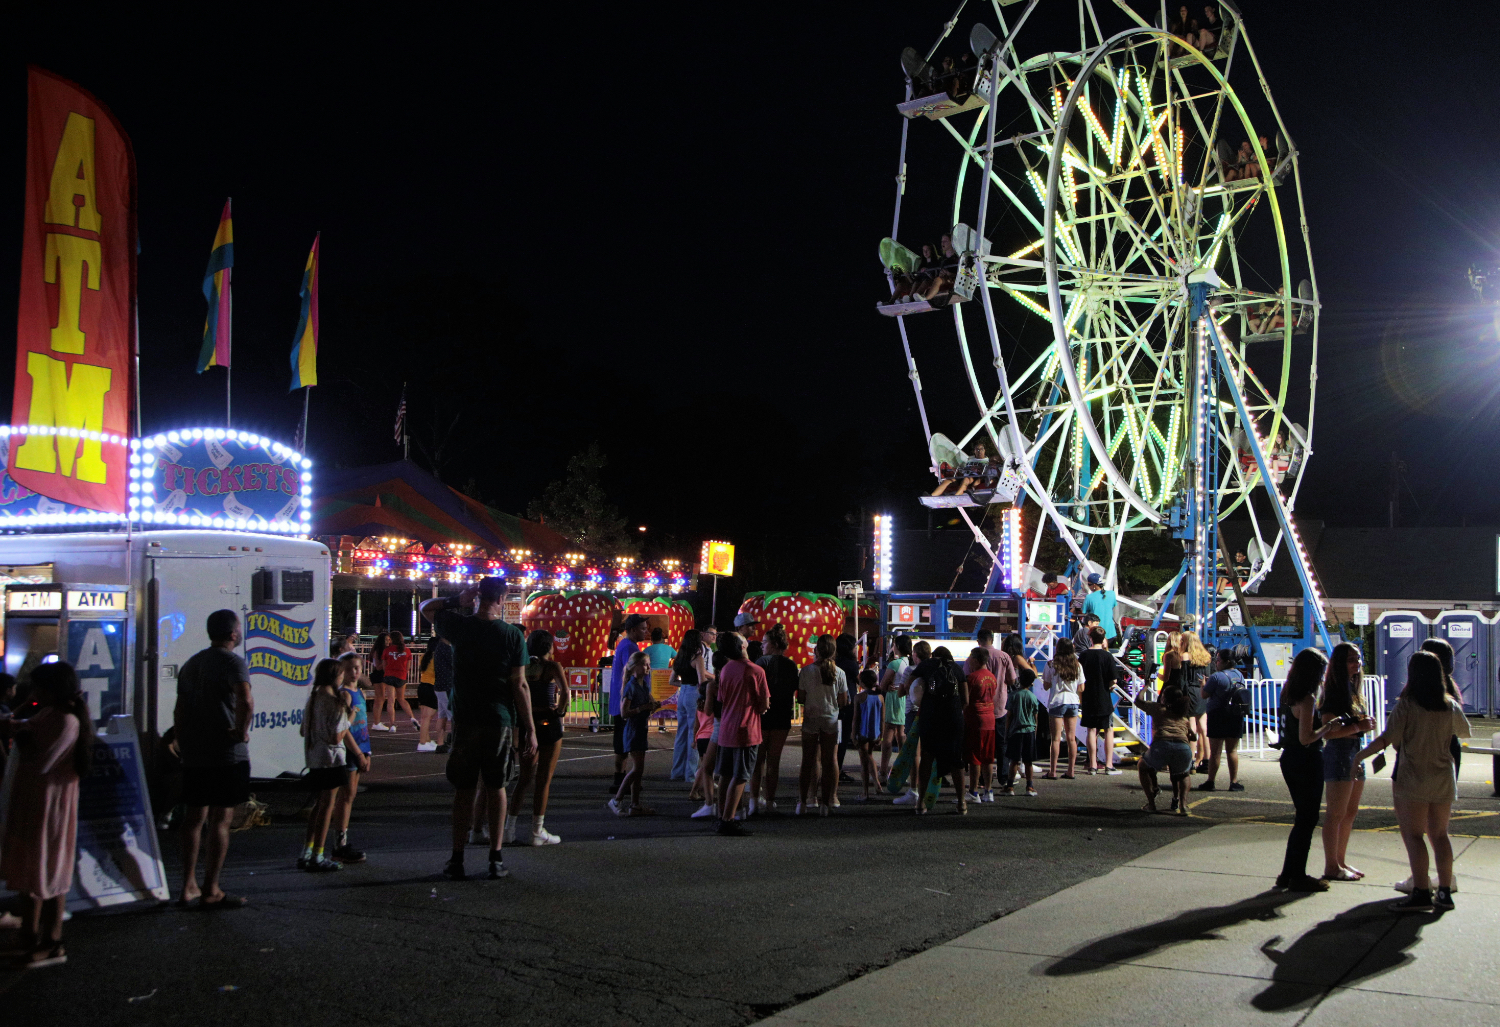 Summer fun! Fire department fundraiser carnival delights — Pascack